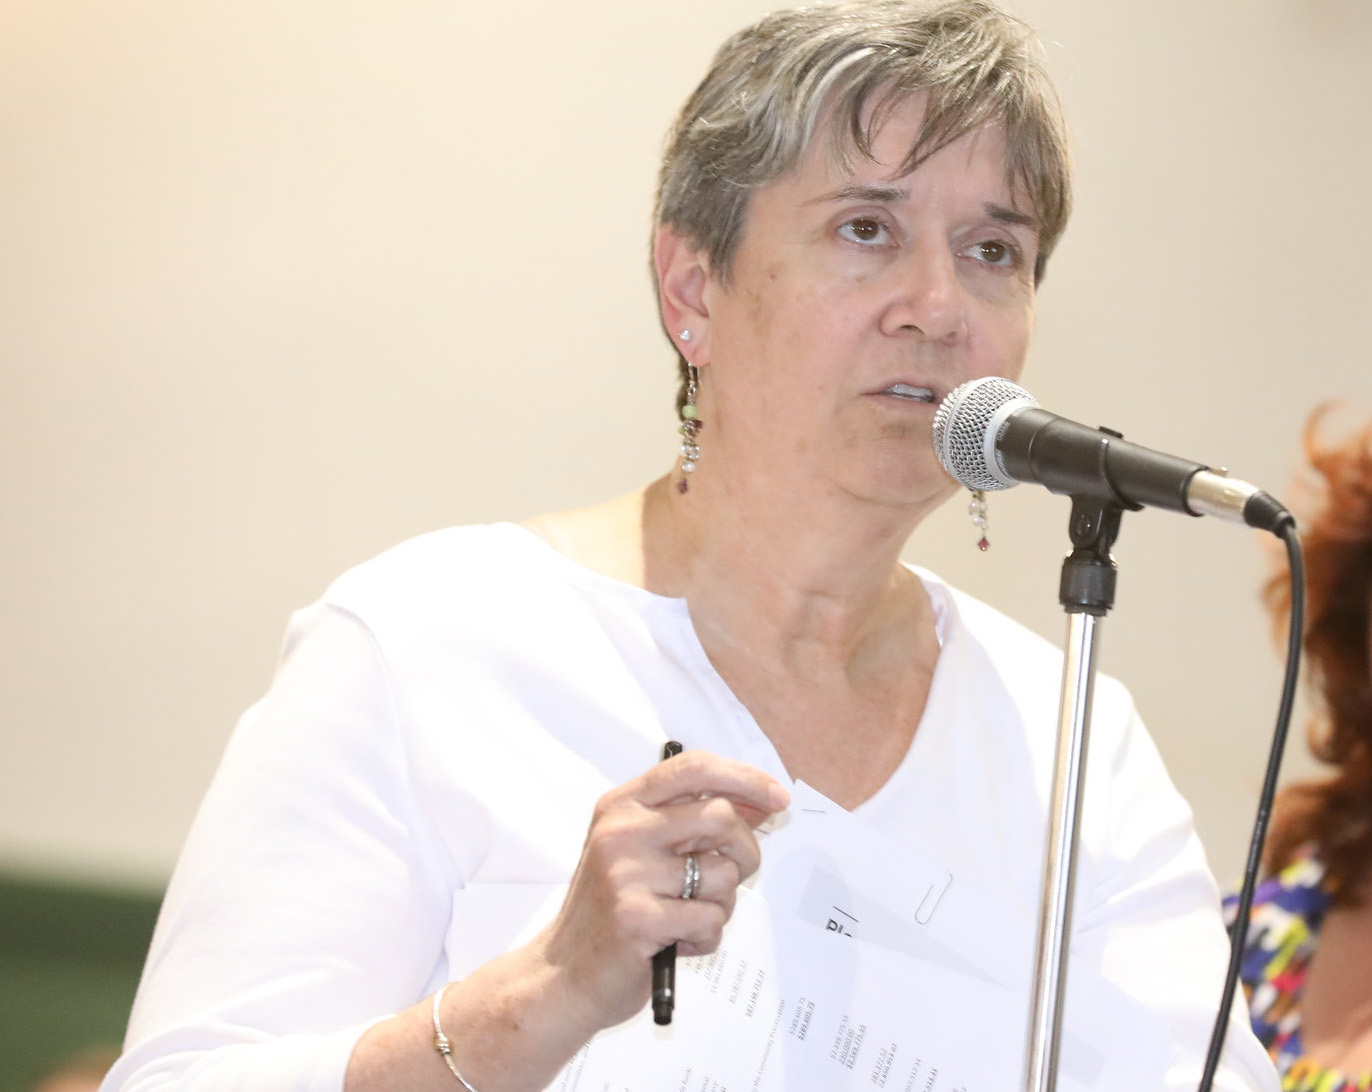 Kramer defends work with Mass. Bail Fund following calls for her resignation from Planning Board